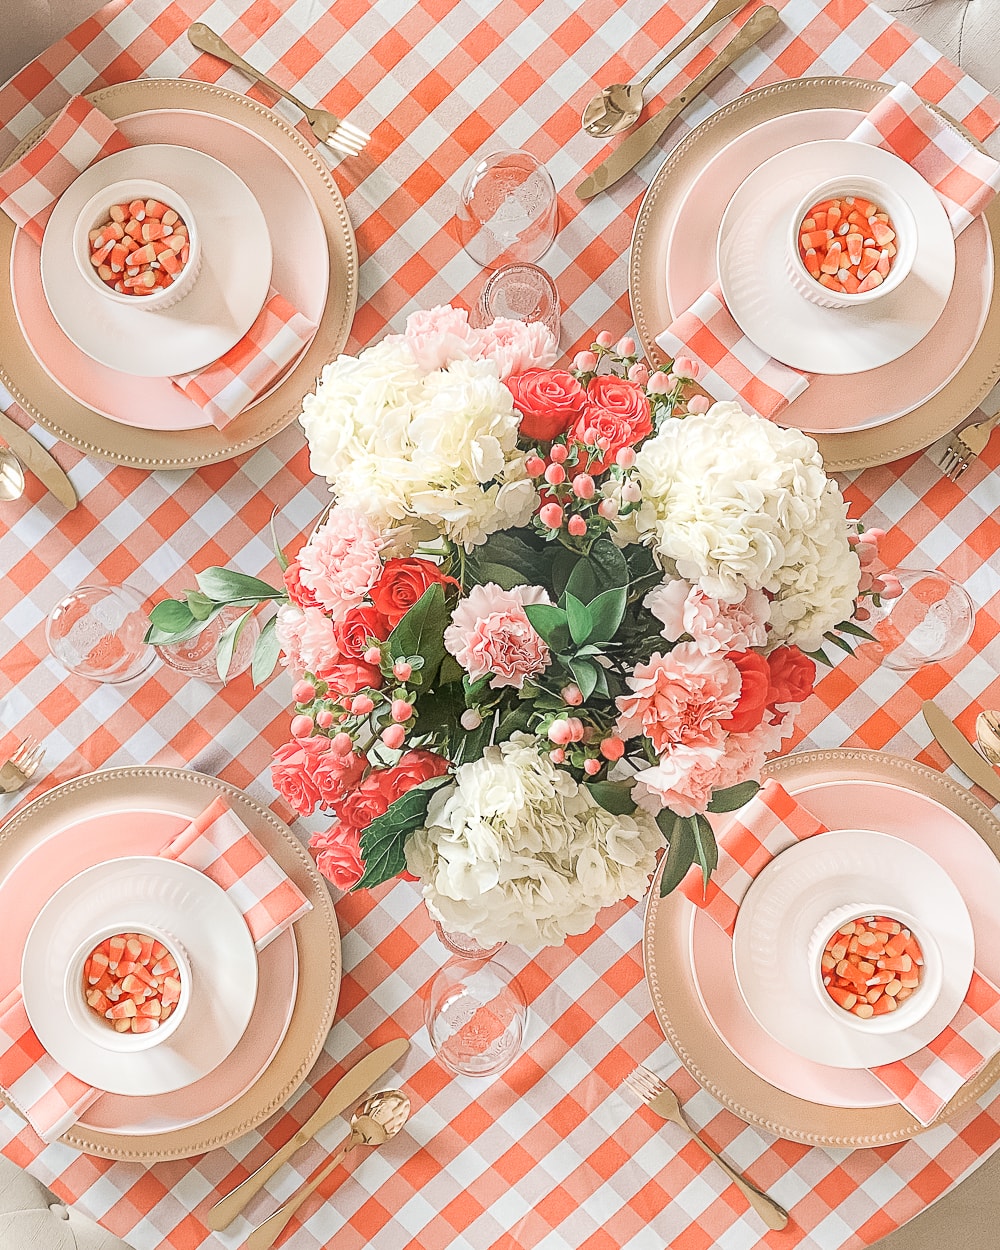 Southern lifestyle blogger Stephanie Ziajka shares a simple Halloween tablescape on Diary of a Debutante